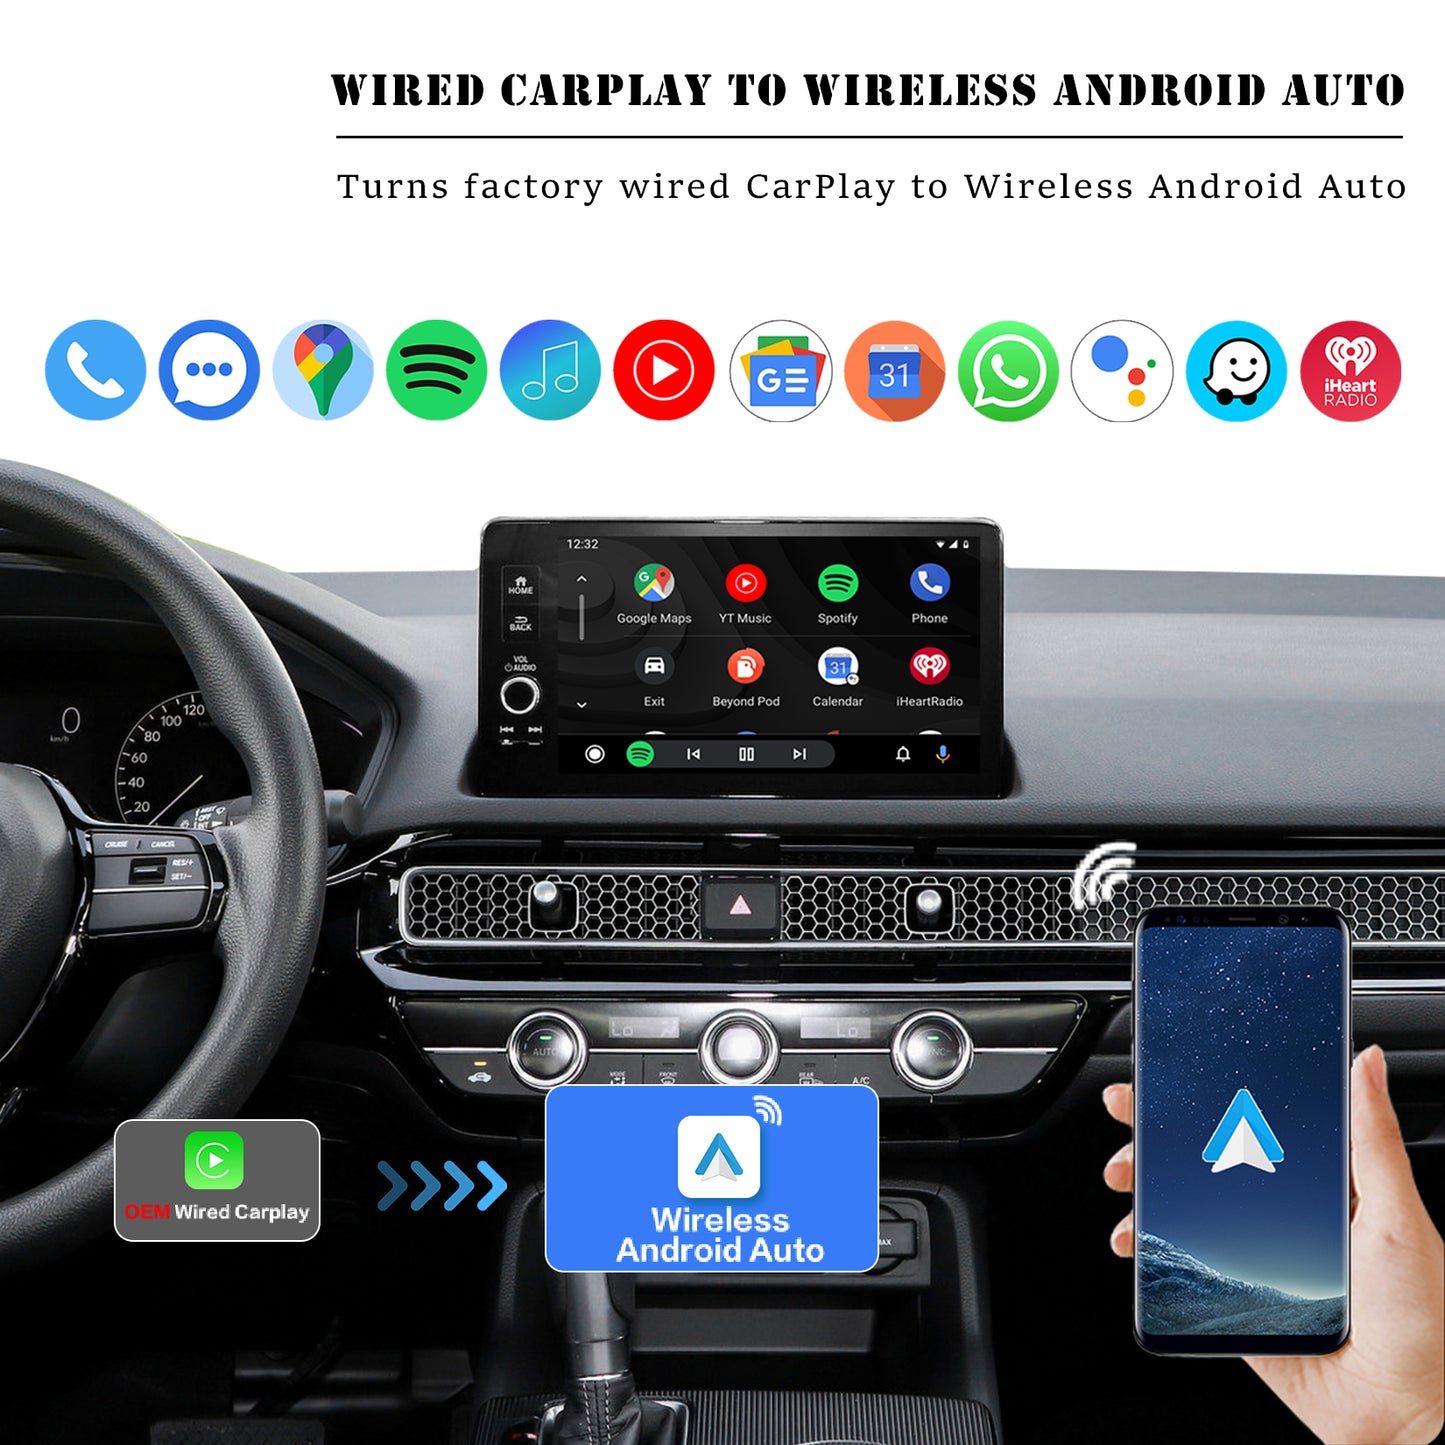 5IN1 Wireless Apple CarPlay Android Auto Adapter Car Screen Mirroring Android 13.0 AI Box Built-in YouTube Netflix Hulu Disney+ QCM6225 8GB+128GB